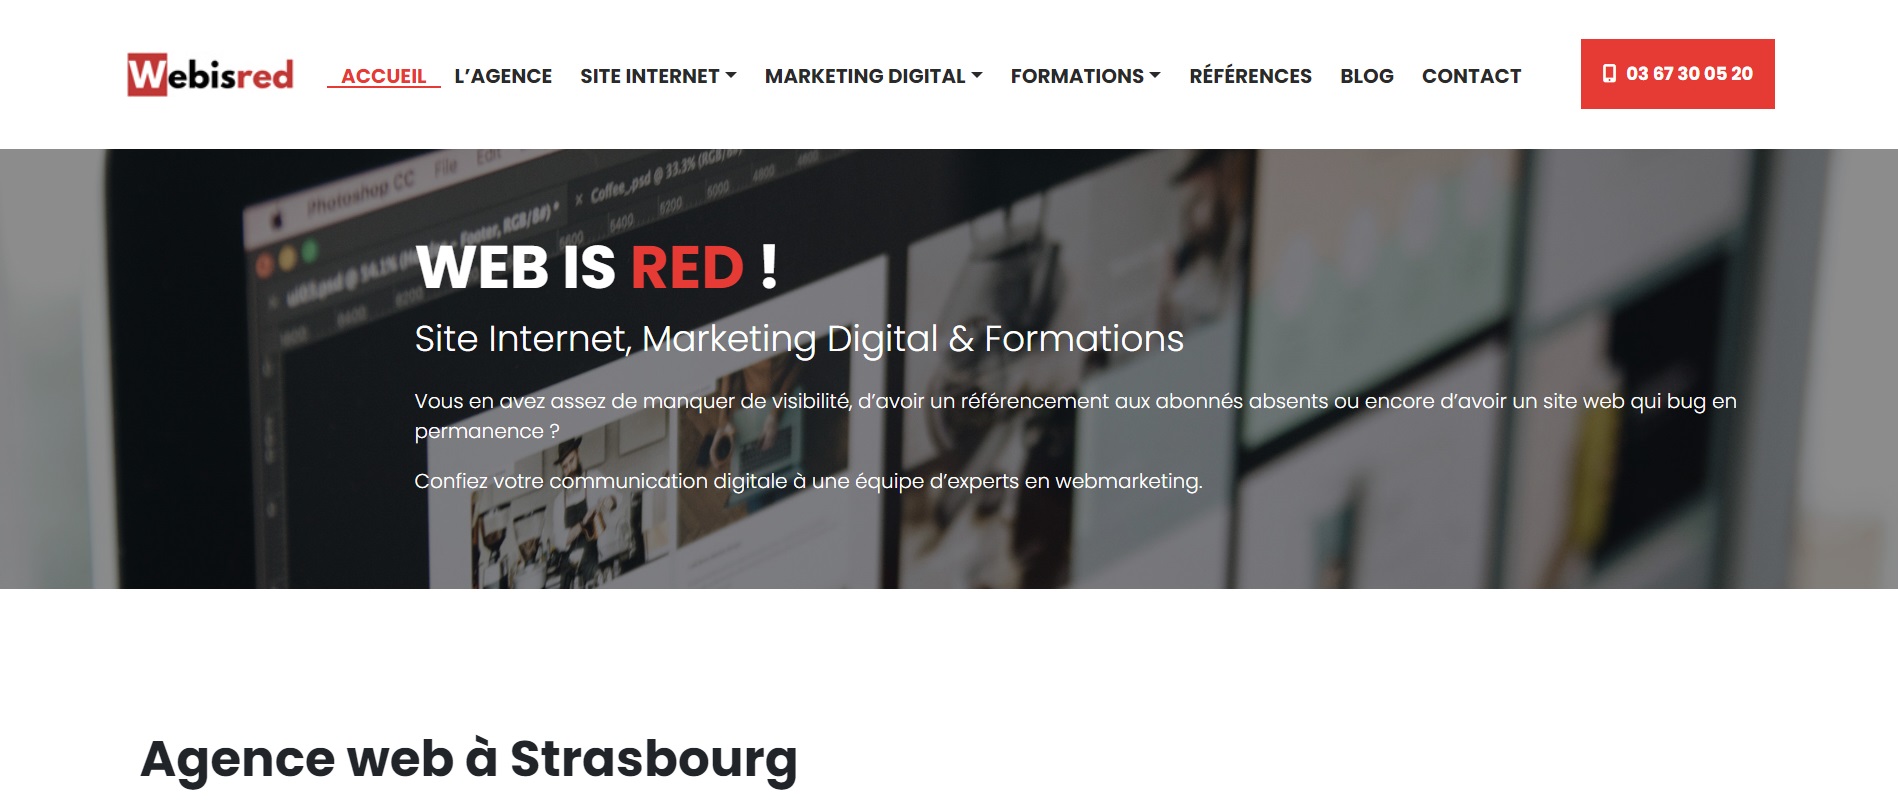  Agence Web Is Red - Agence Web à Strasbourg 